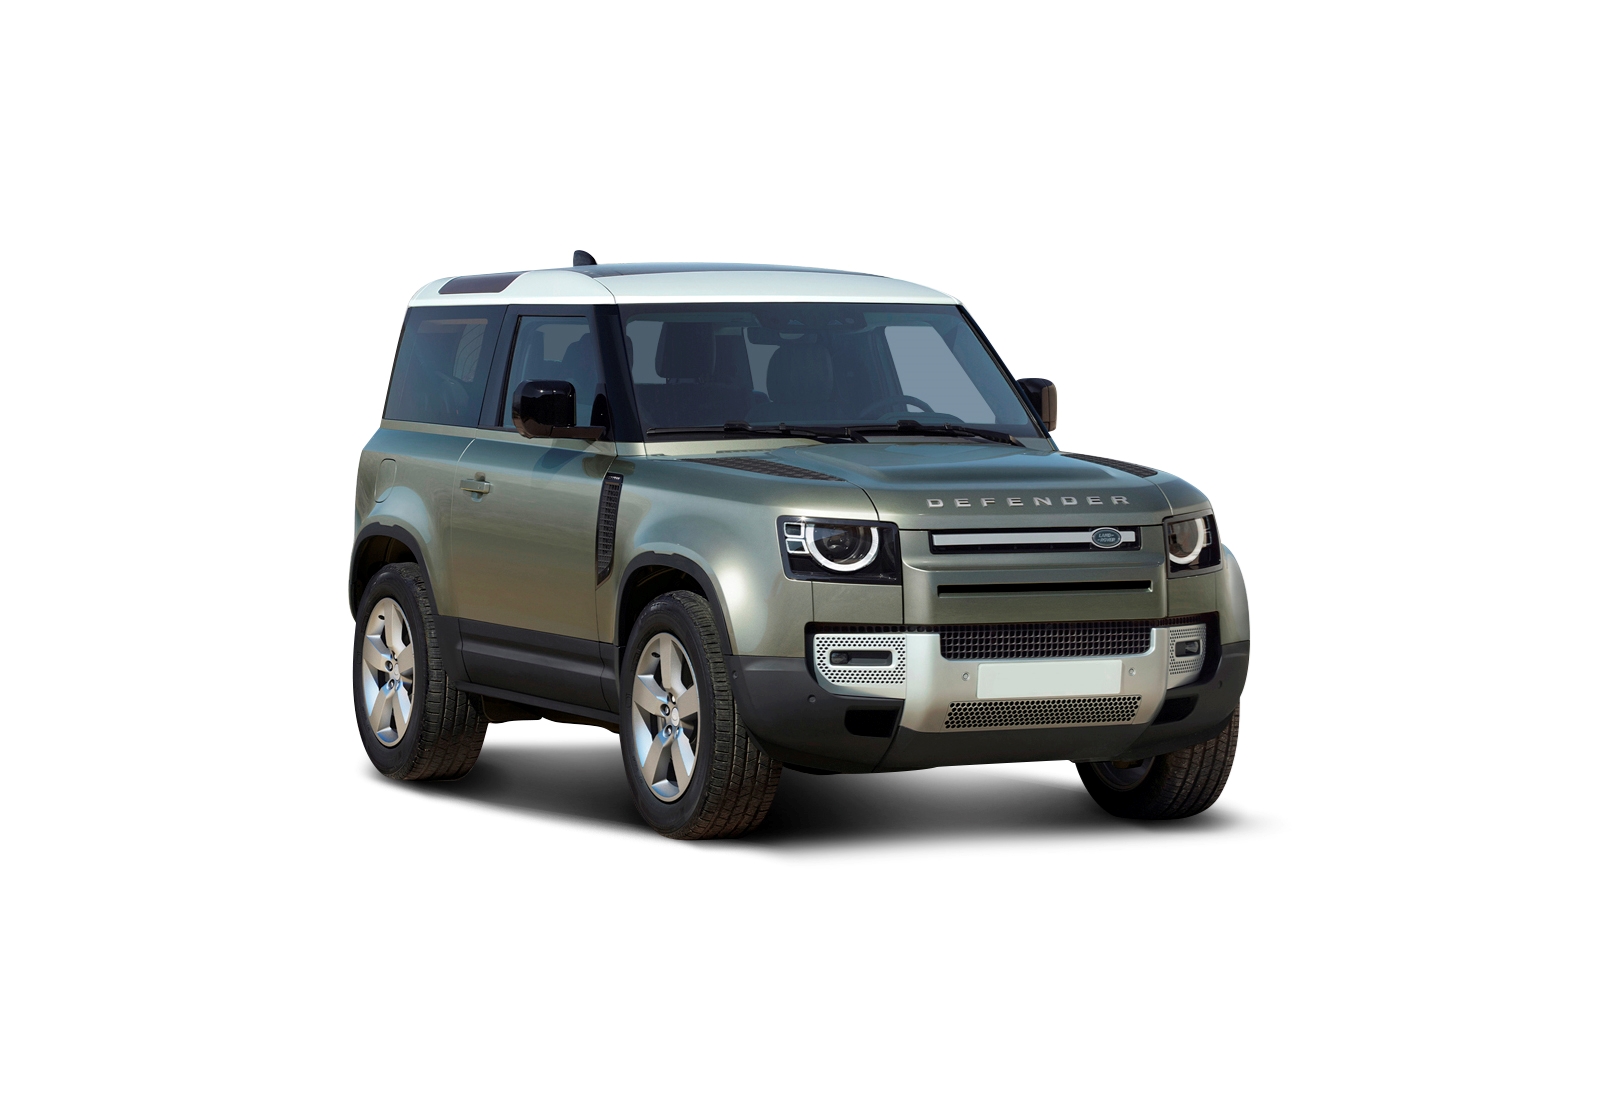 2022 Land Rover Defender 90 V8 Full Specs, Features and ...